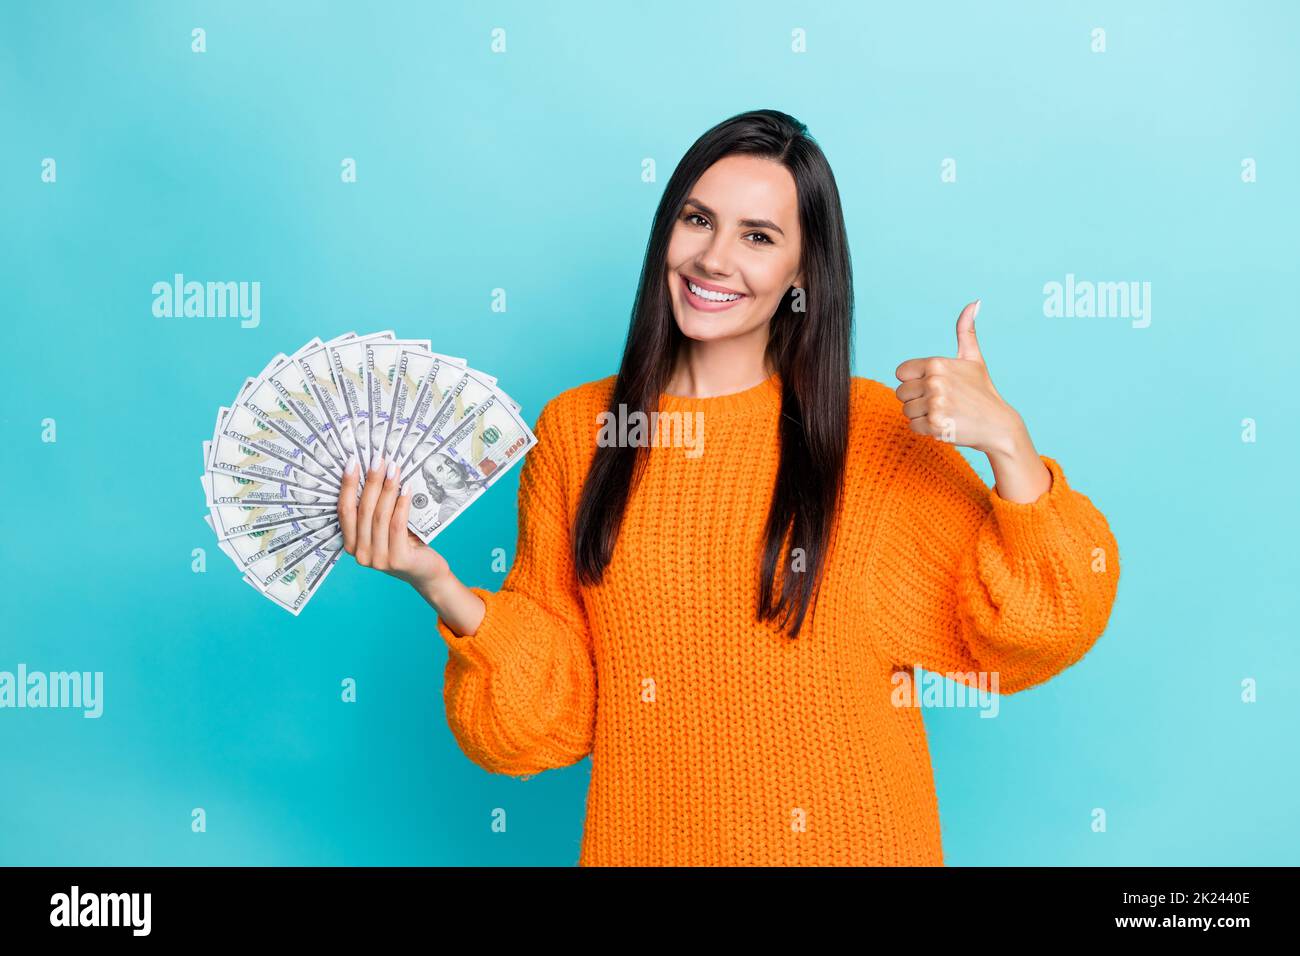 Photo of adorable cute girl with straight hairdo dressed orange sweater showing thumb up holding money isolated on turquoise background Stock Photo